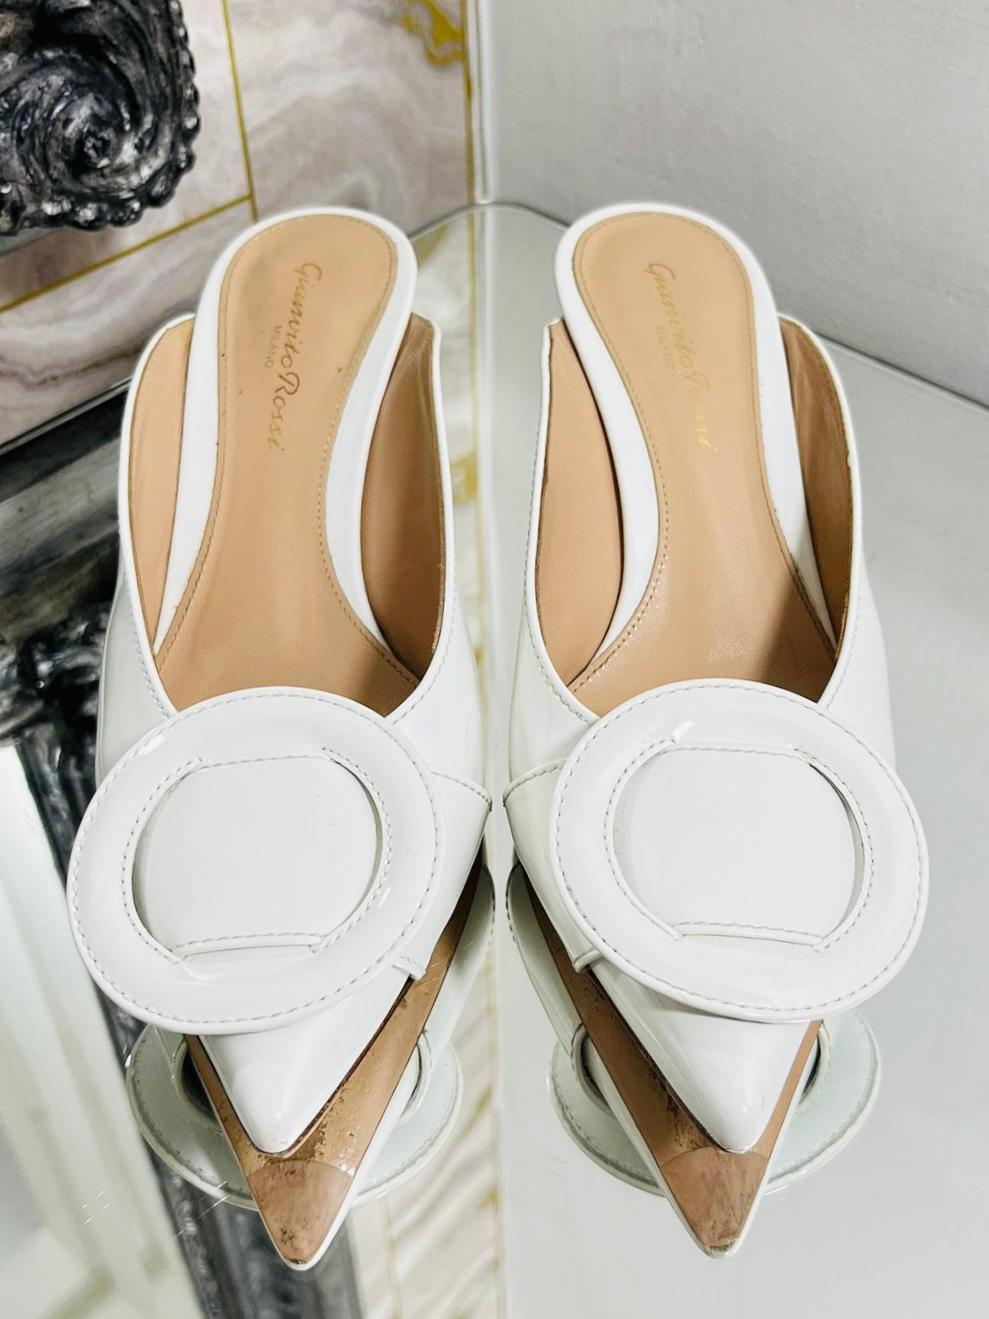 Gianvito Rossi Leather Round Buckle Mules

White kitten heels with round buckle feature to fronts.

Size - 35.5

Condition - Good (Some marks to leather and heel)

Composition - Leather

Comes With - Box